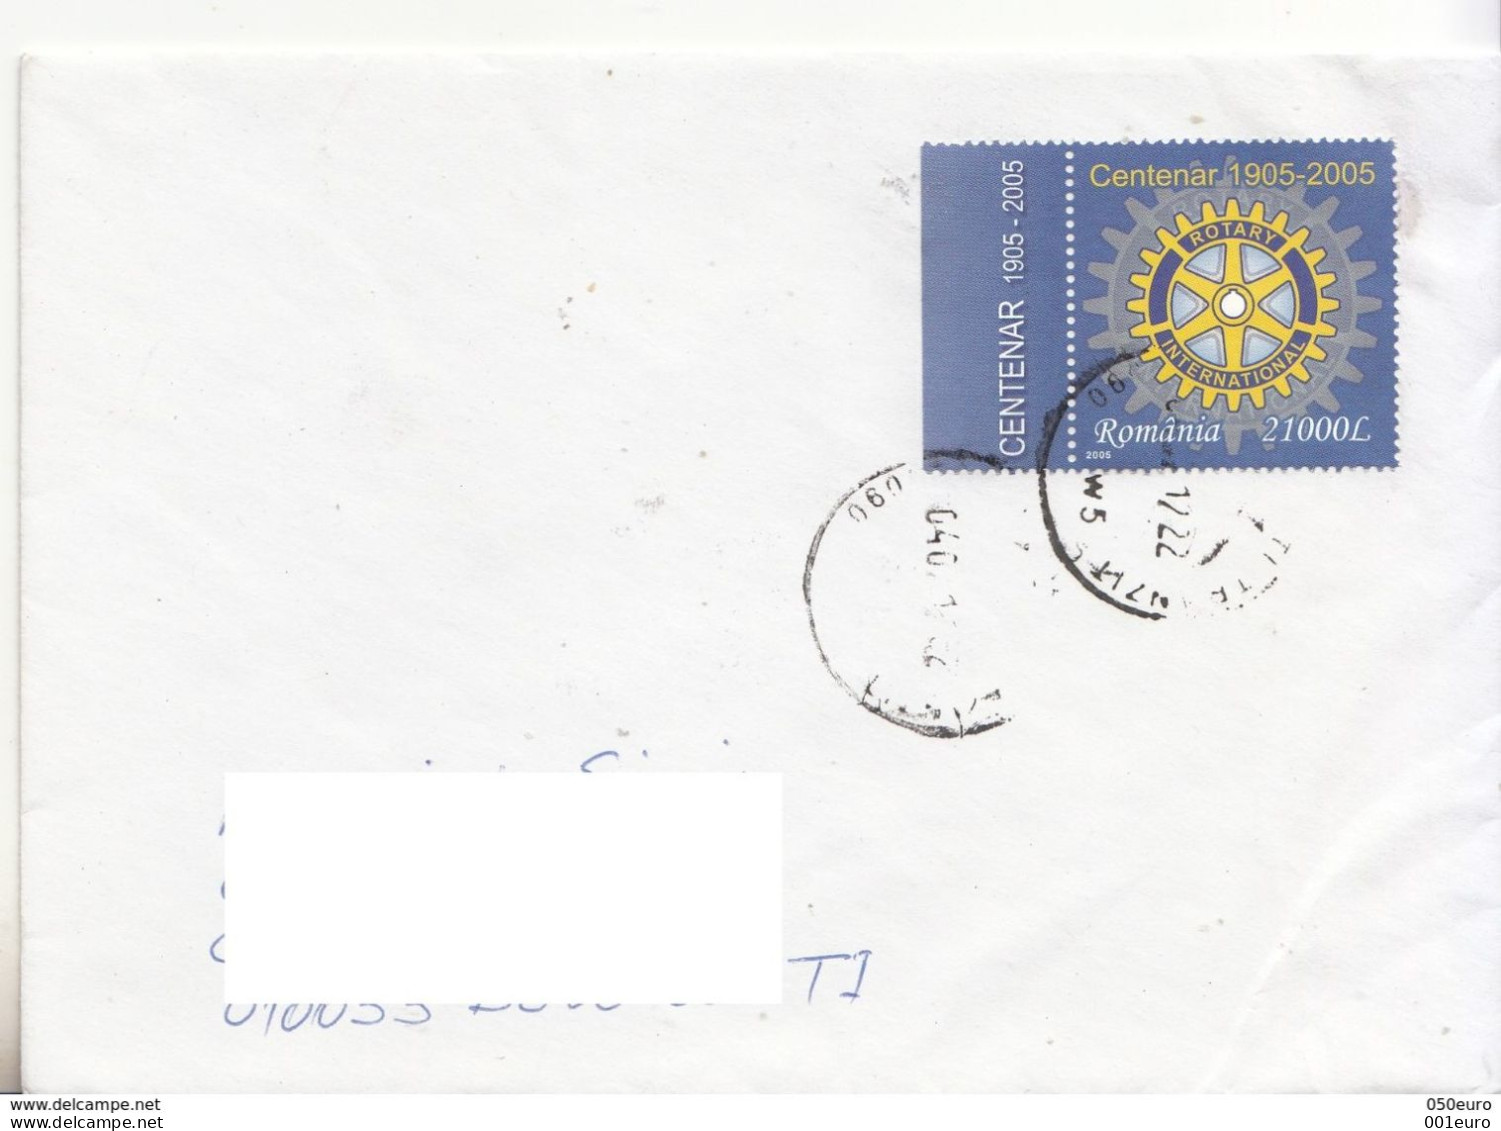 # ROMANIA : Lot of 4 covers circulated as domestic letters in Romania #1043364880 - registered shipping!